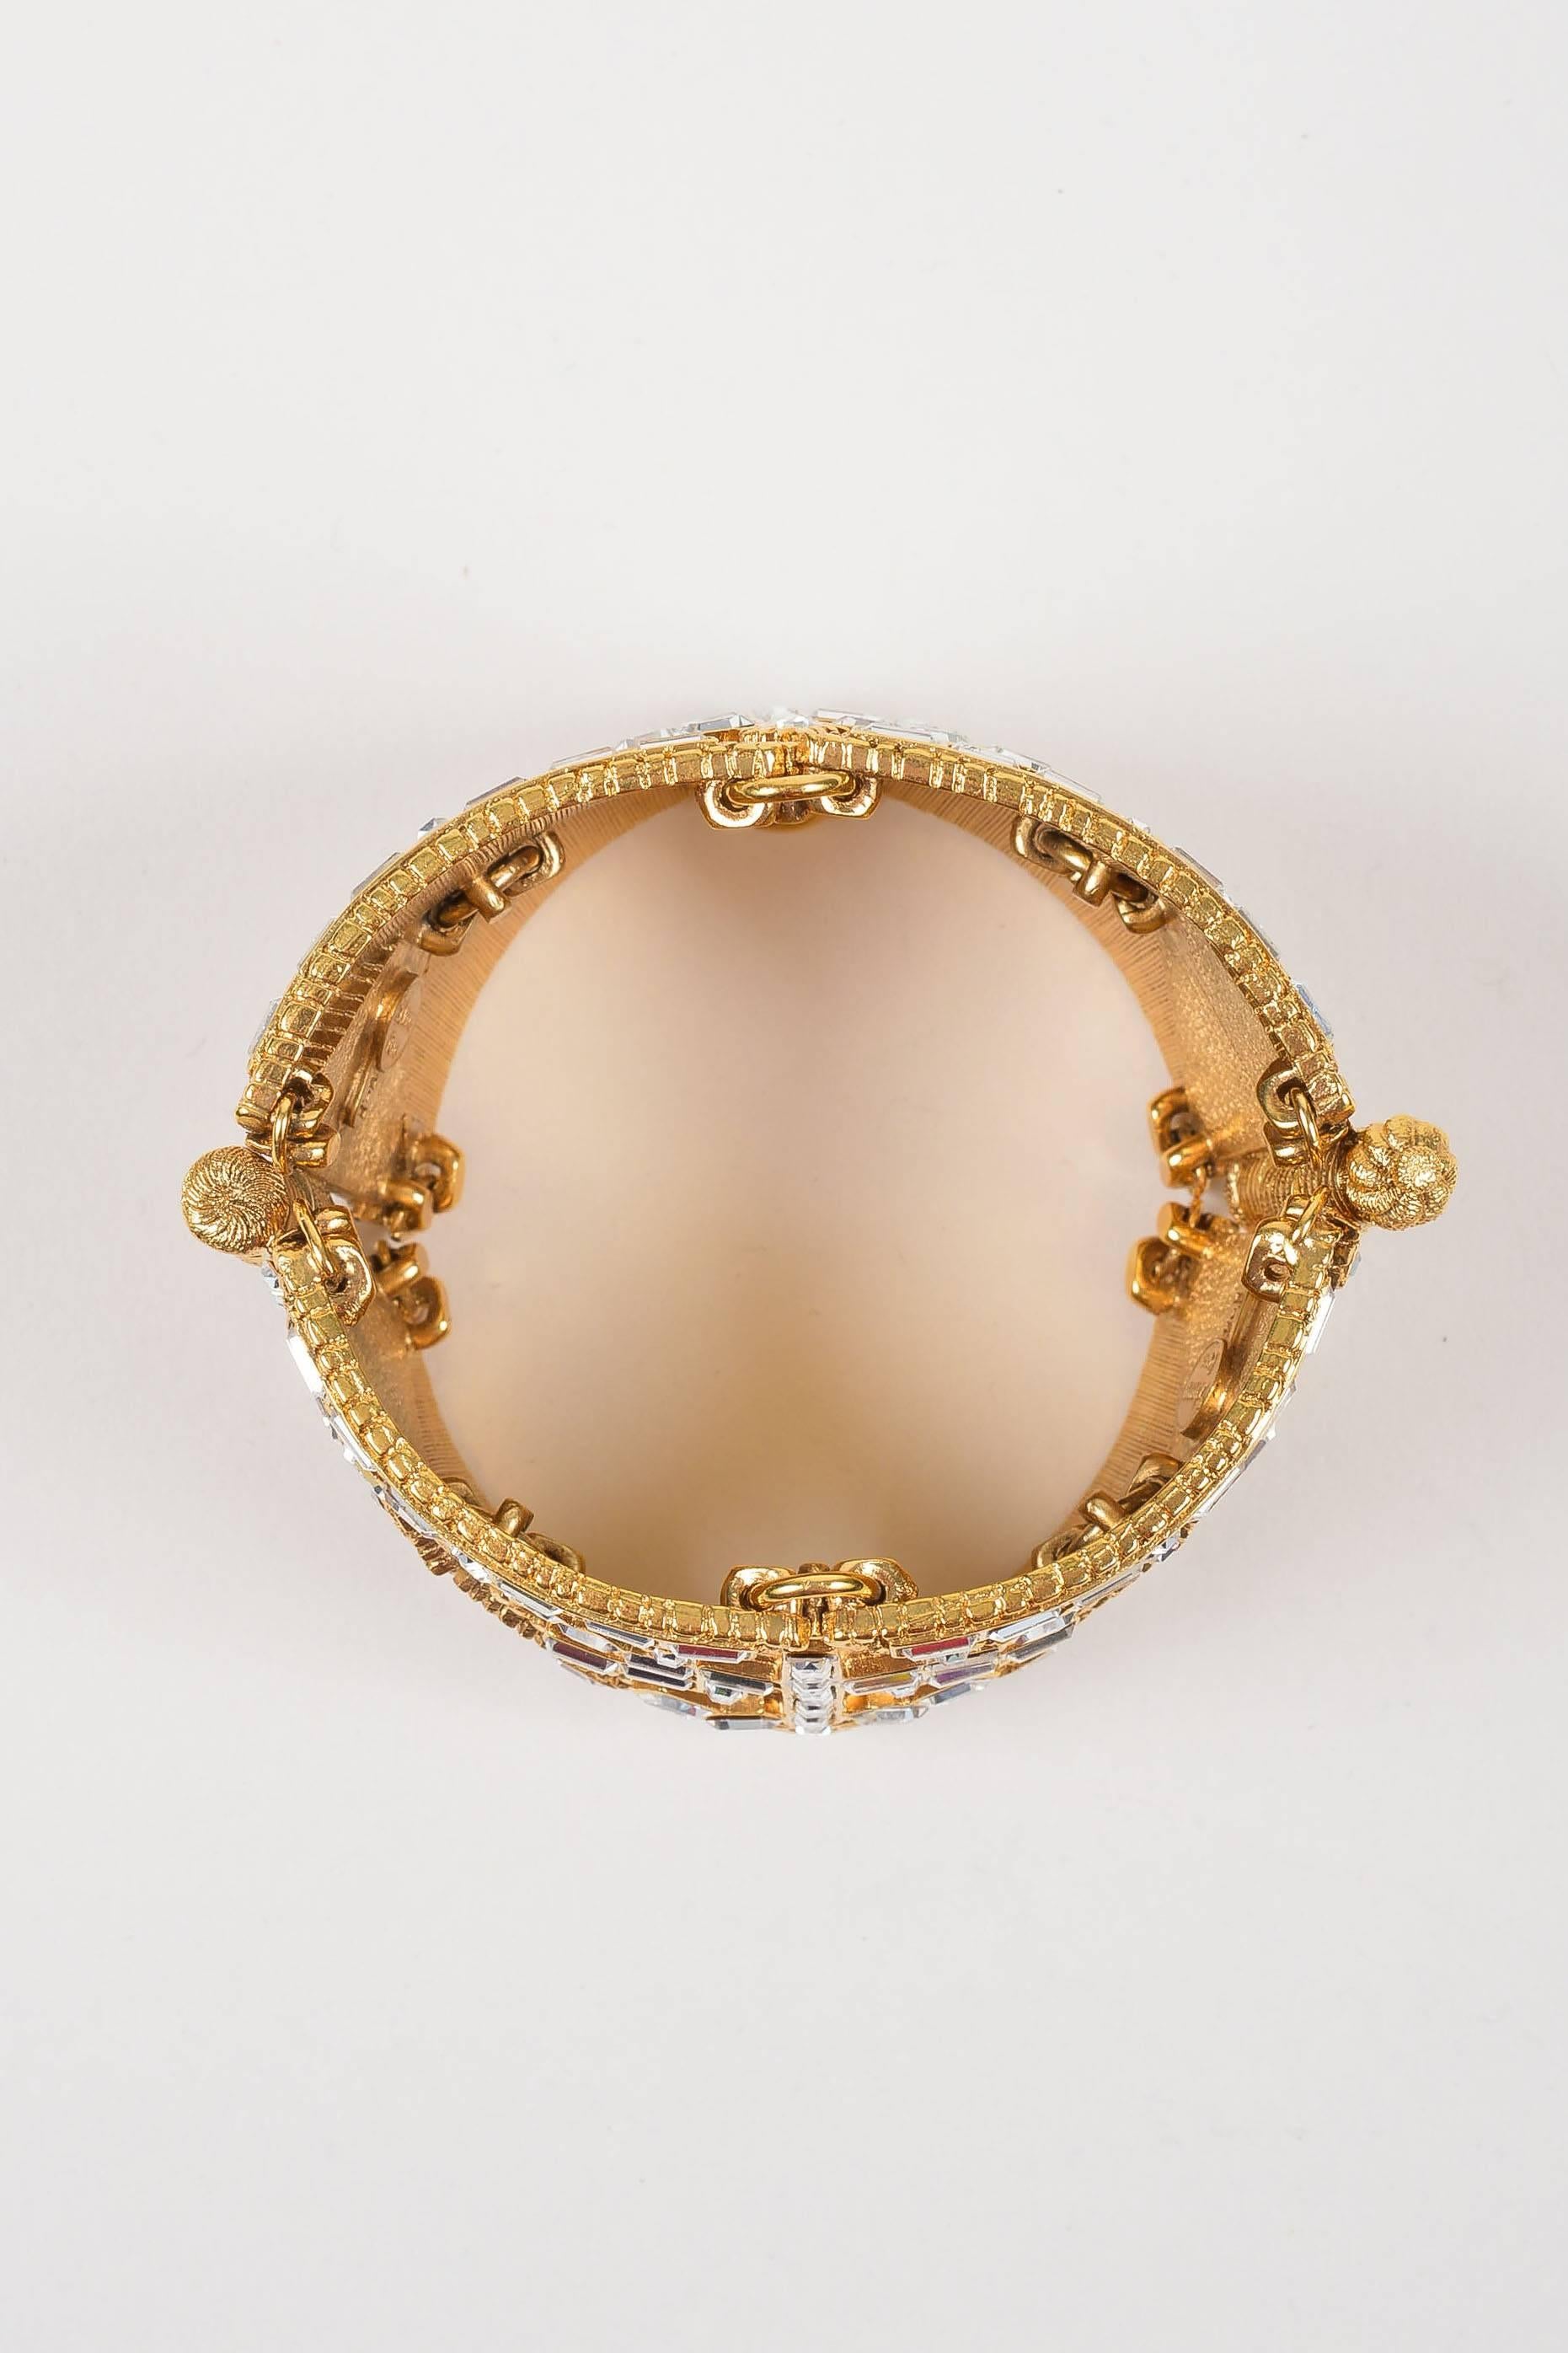 Embellished statement bracelet to make an elegant look stand out. Band is constructed of geometric cut outs connected by o-ring links on interior. Gold-tone plated metal with textured rope pattern throughout. Baguette crystal stones throughout.